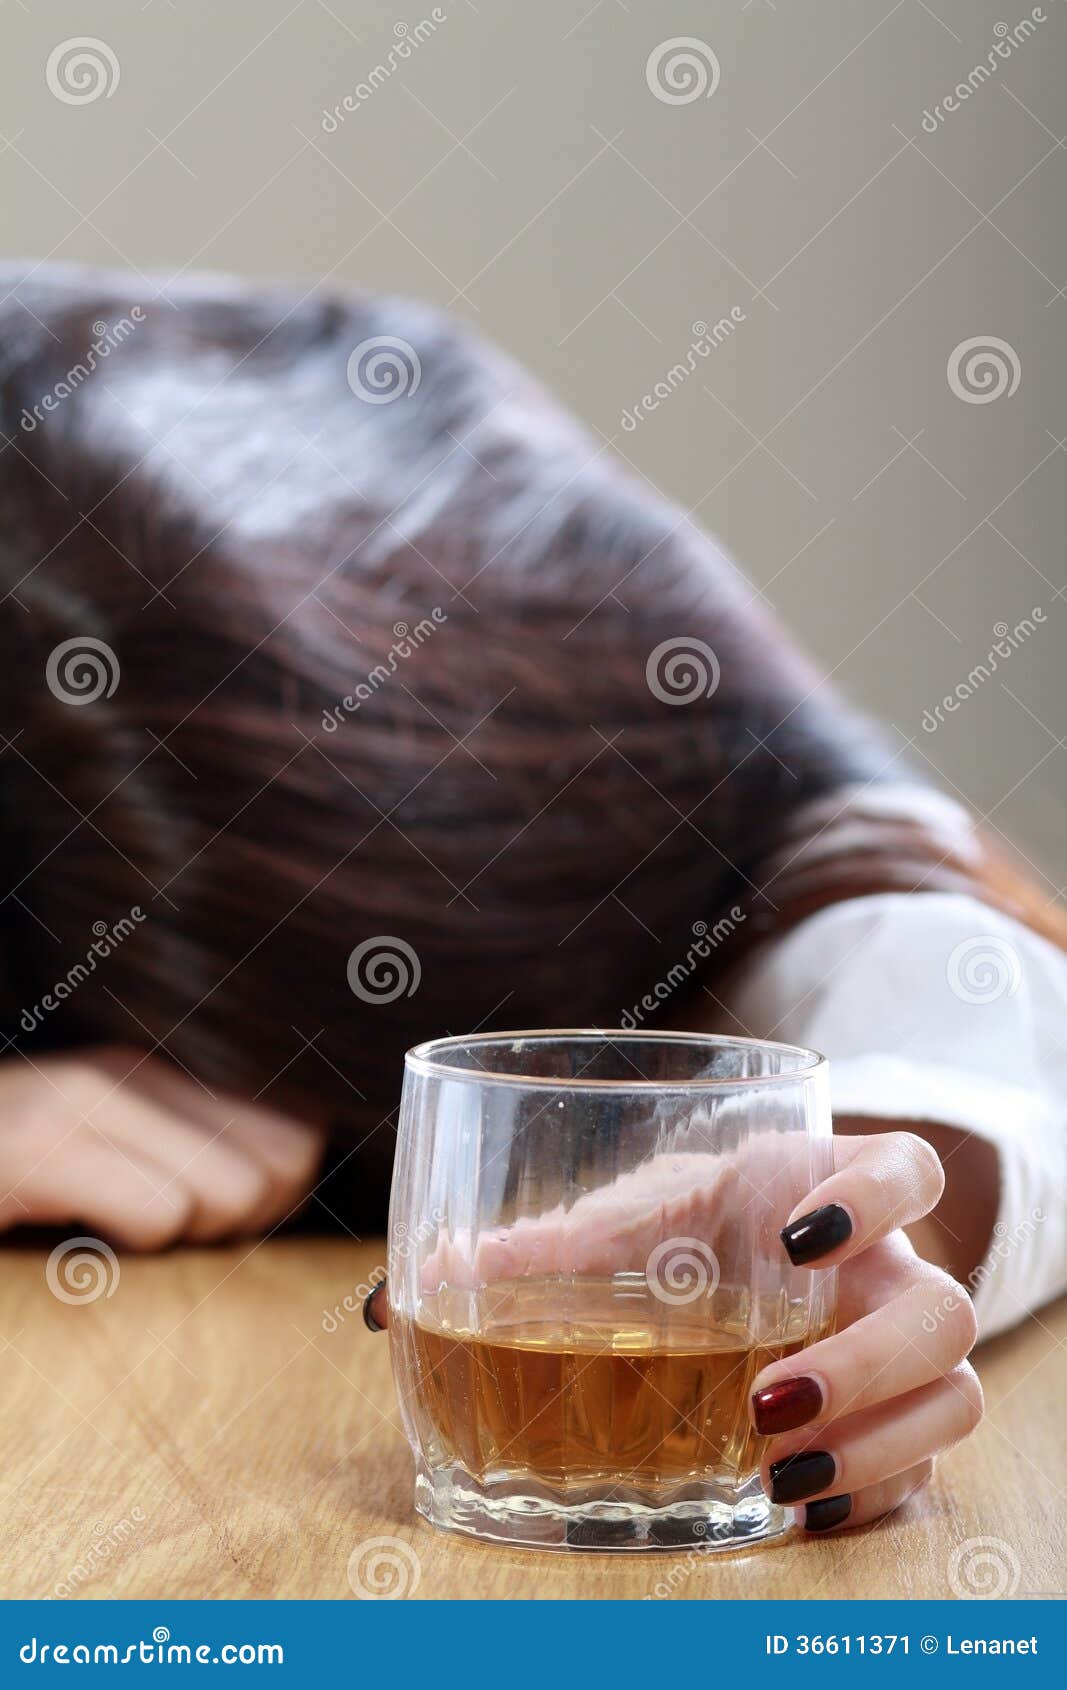 Woman Holding An Alcoholic Drink Stock Image Image Of Depression Alcohol 36611371